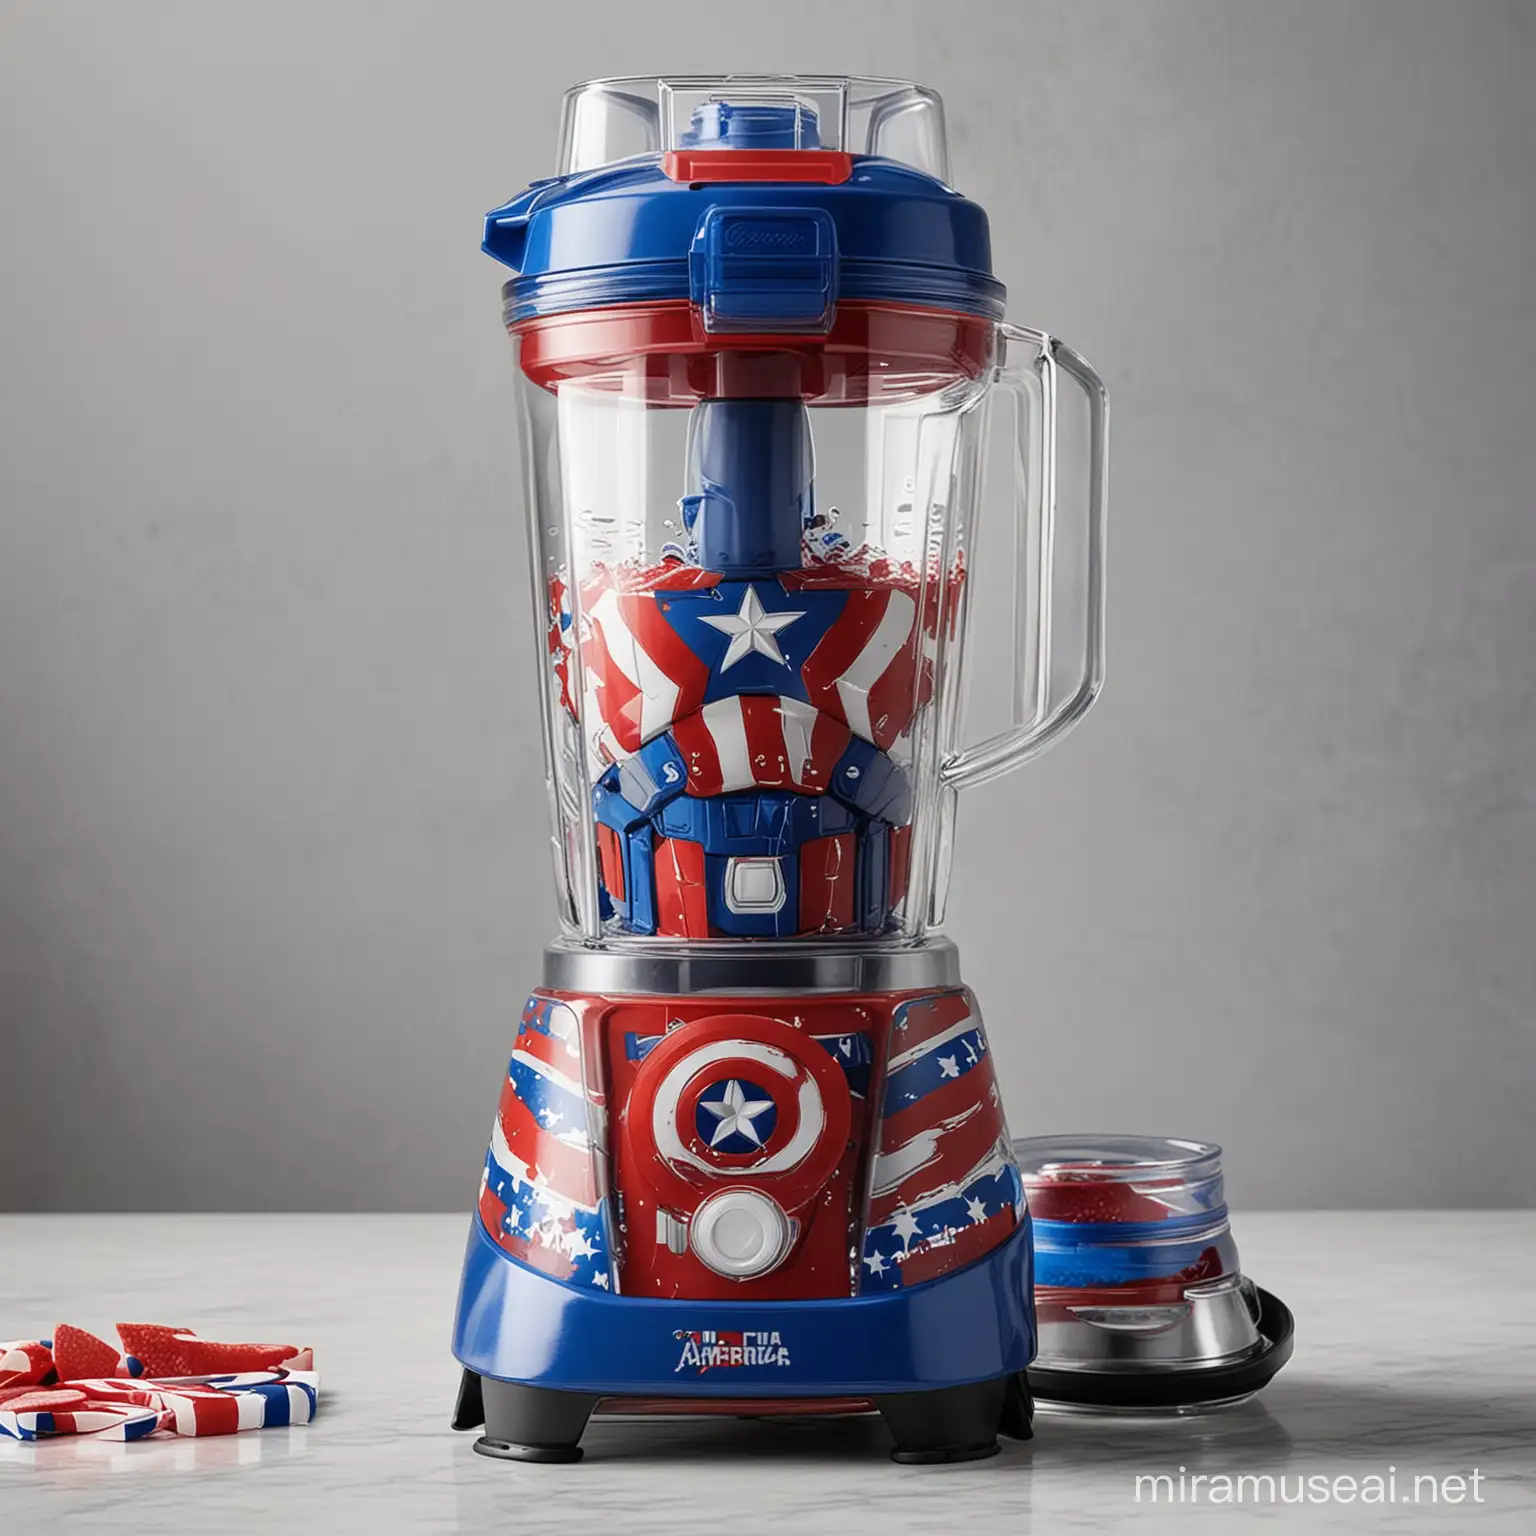 Image of an Captain America patterned blender machine